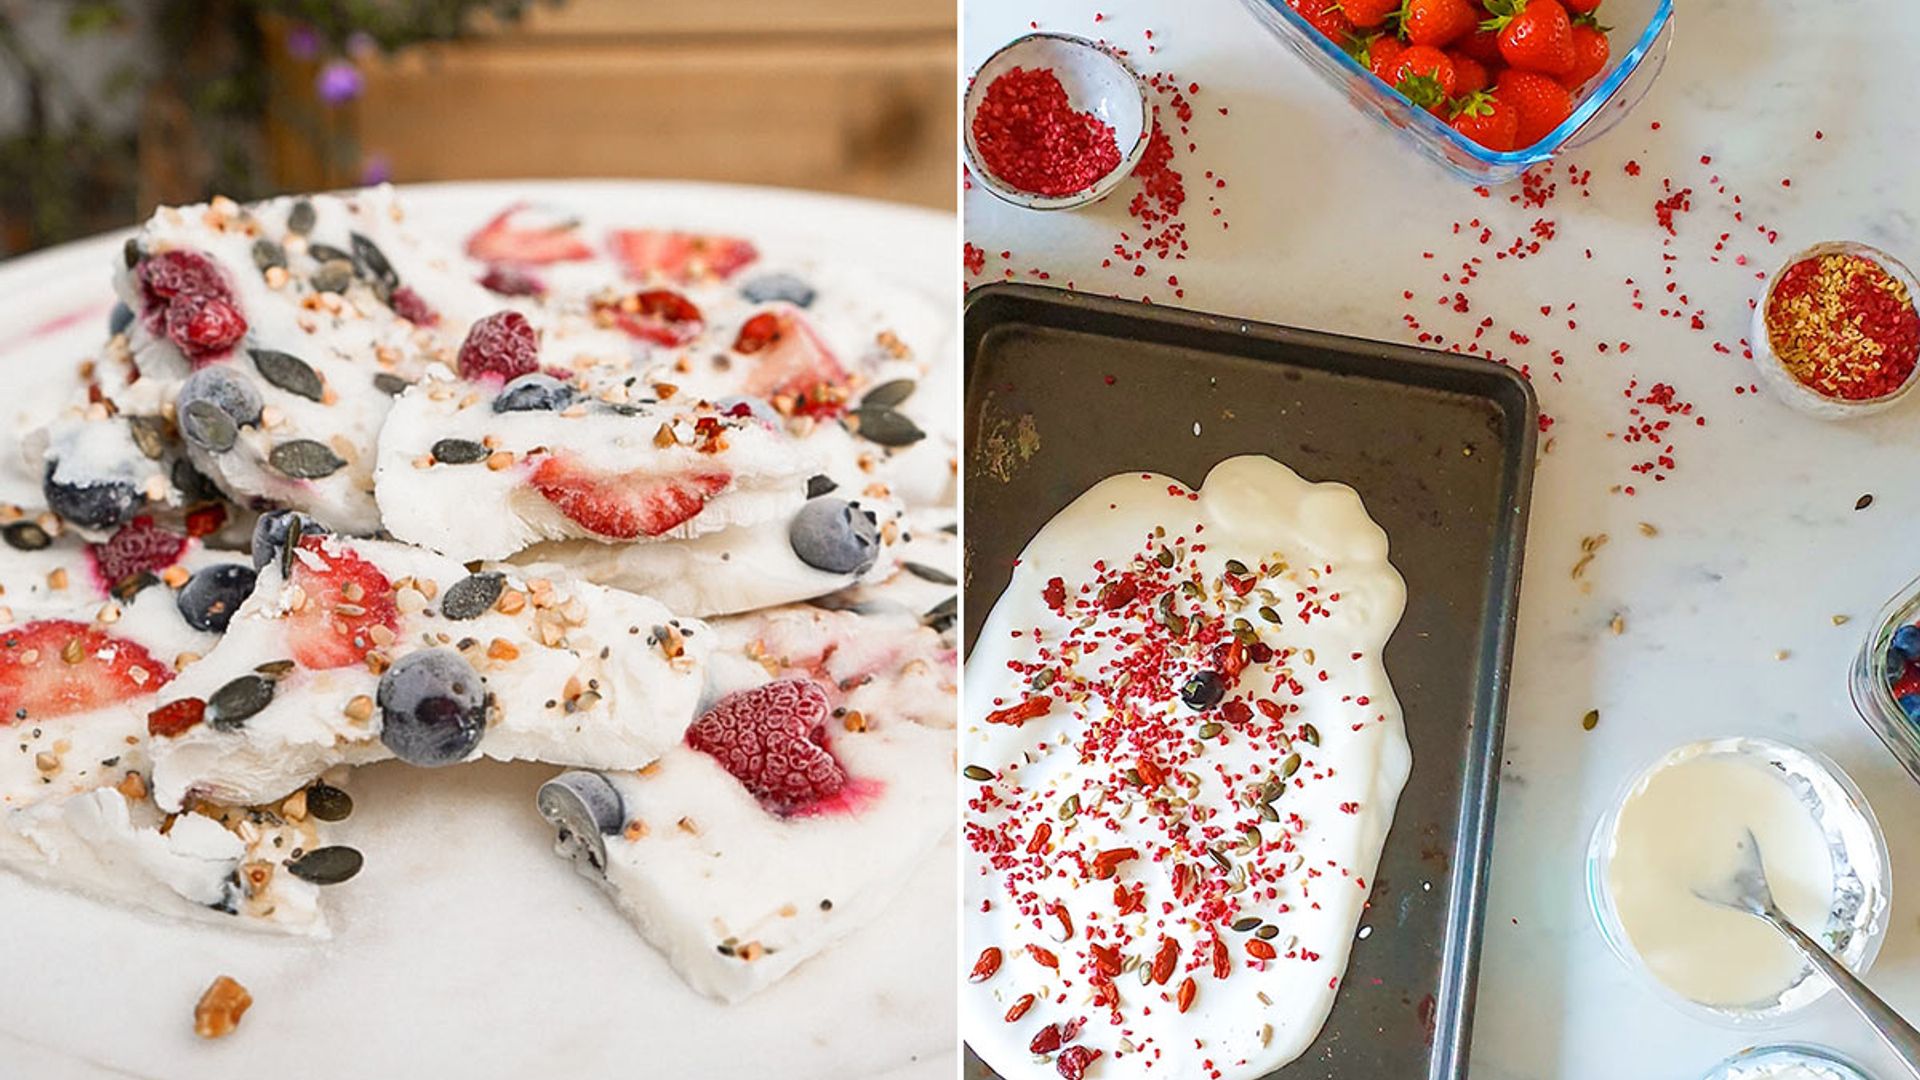 Looking for a healthy snack? Try making this super-easy yoghurt bark recipe